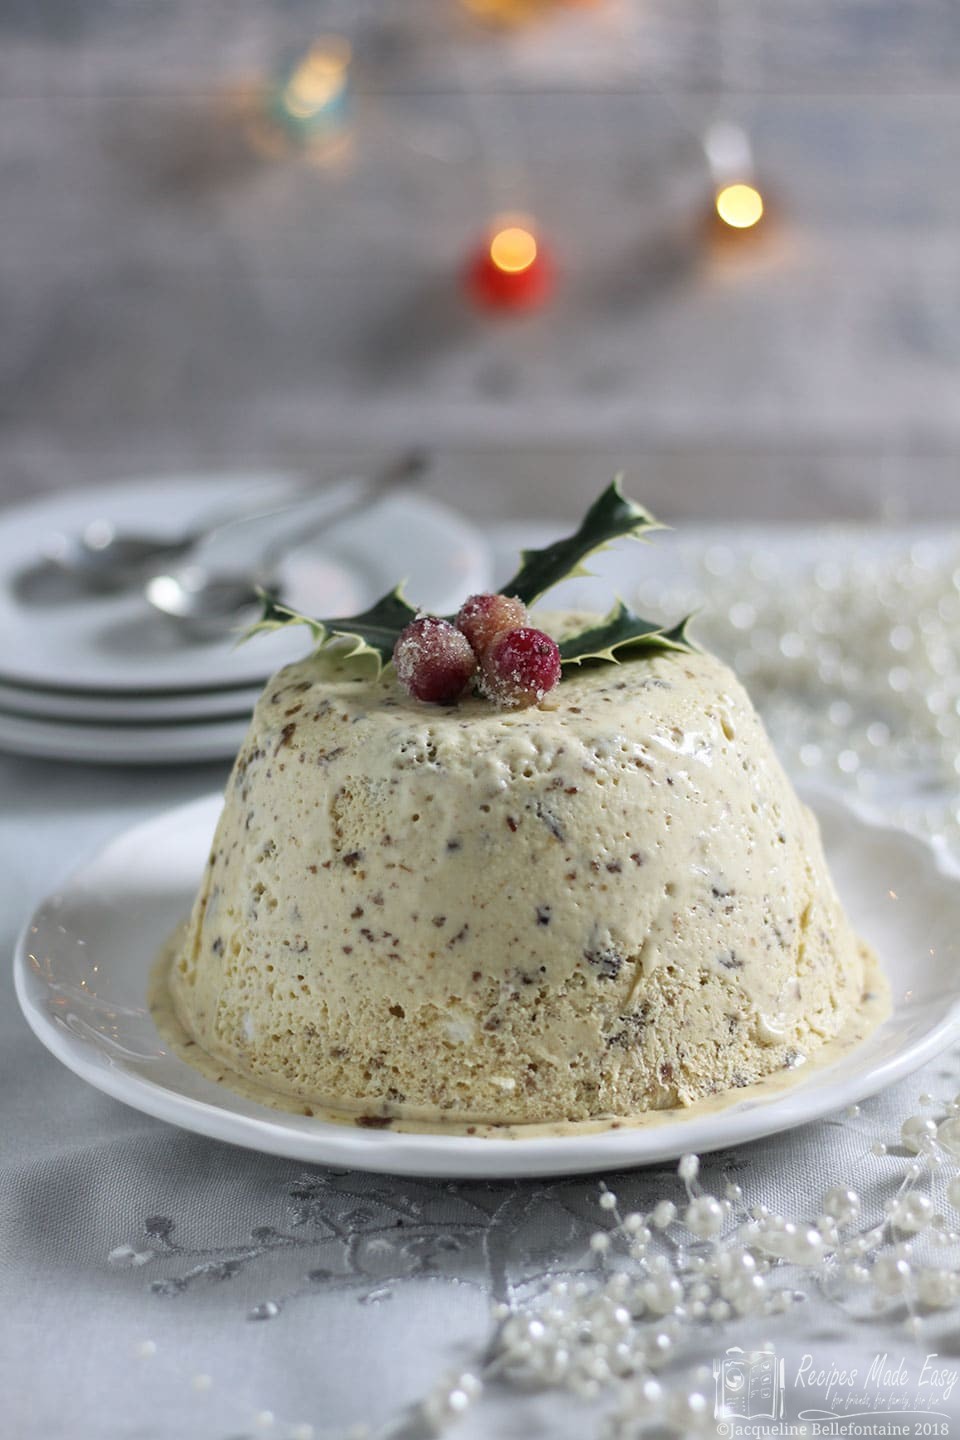 Recipes made easy - No churn Chrsitmas Pudding Ice cream. All the flavour of the Chrsitmas pudding in an easy to make no churn ice cream.